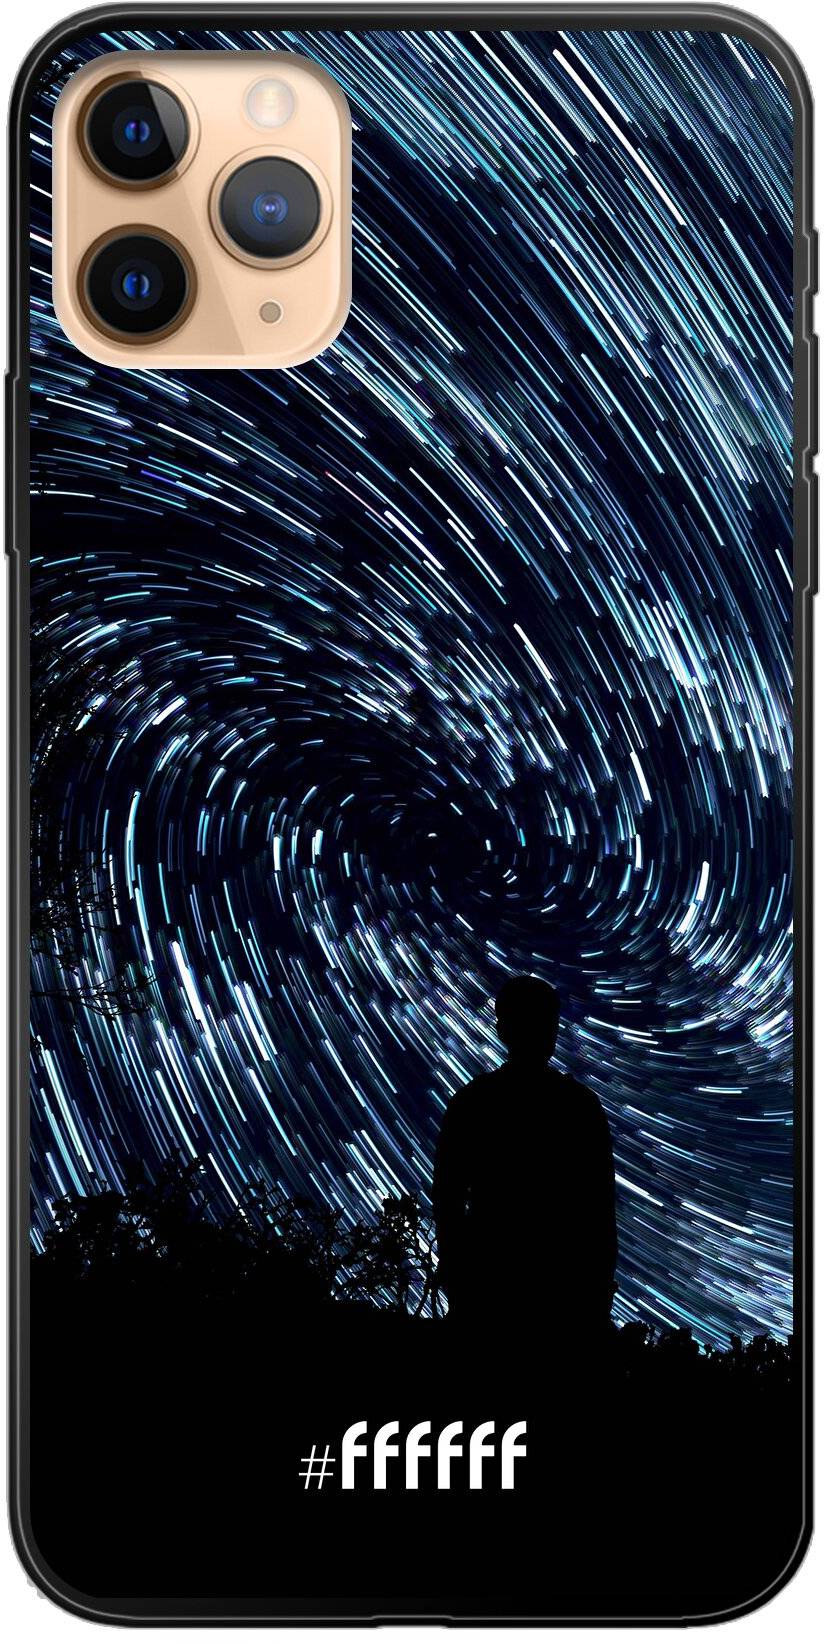 Starry Circles iPhone 11 Pro Max